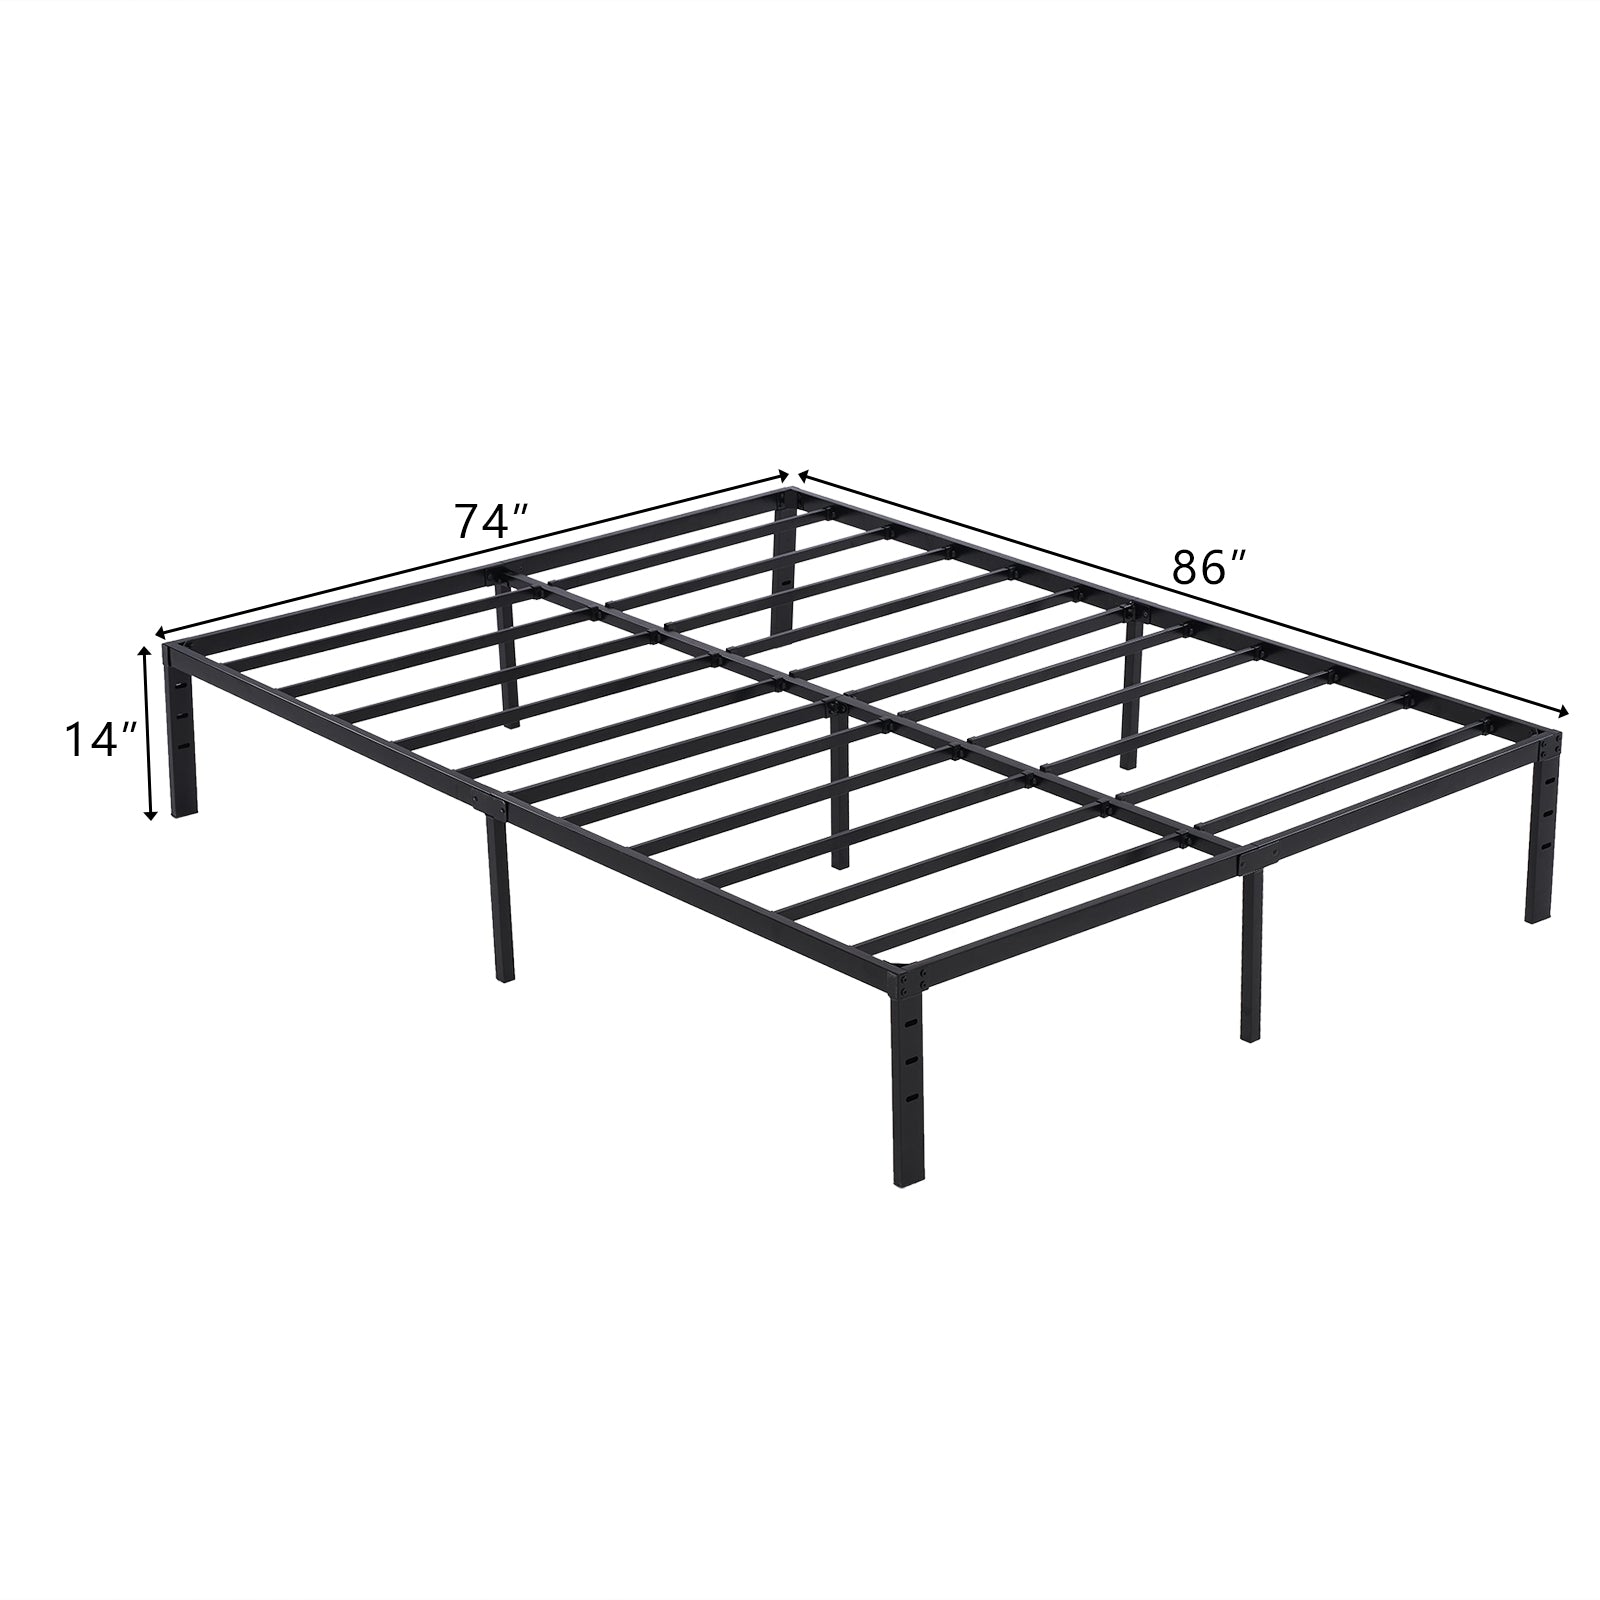 ZNTS 218.5*188*35.5cm Bed Height 14" Simple Basic Iron Bed Frame Iron Bed Black 52496020